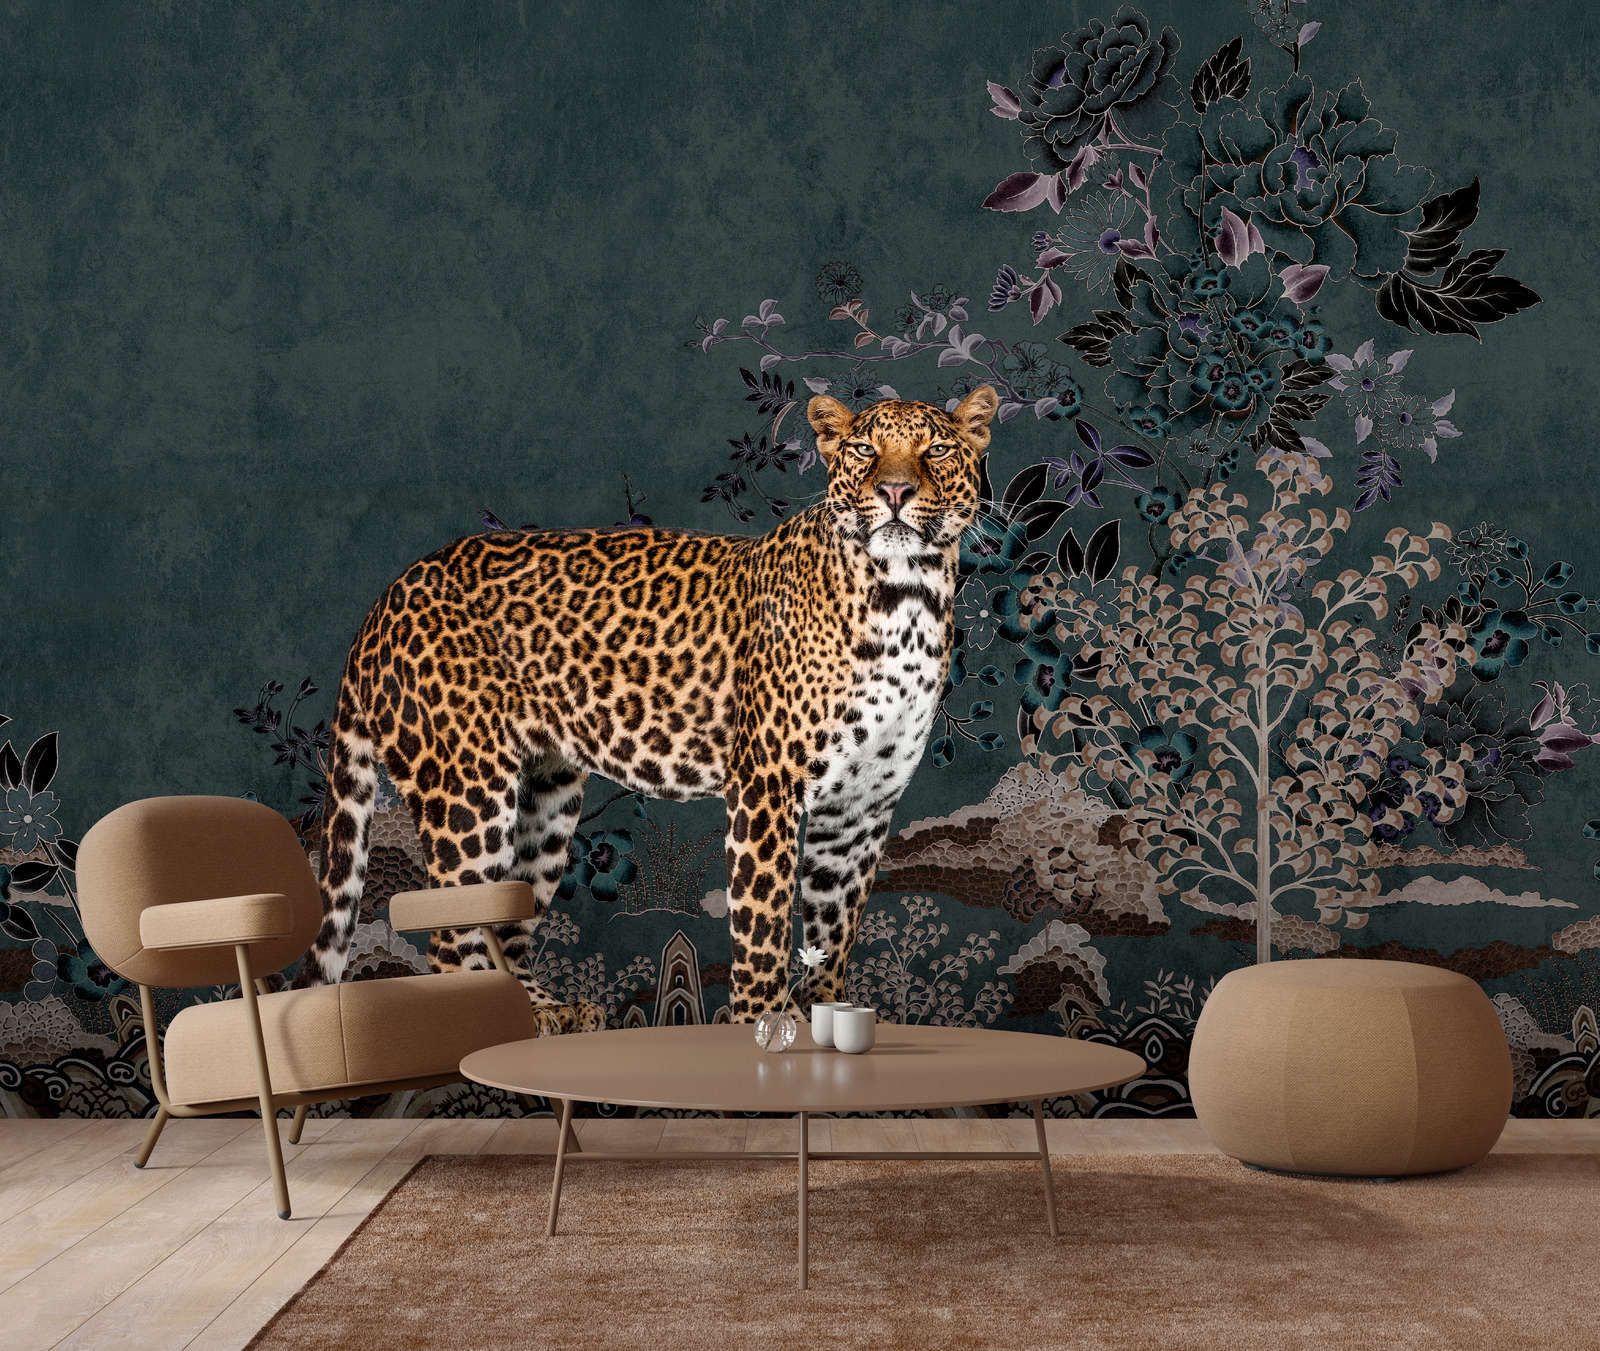             Photo wallpaper »rani« - Abstract jungle motif with leopard - Smooth, slightly pearly shimmering non-woven fabric
        